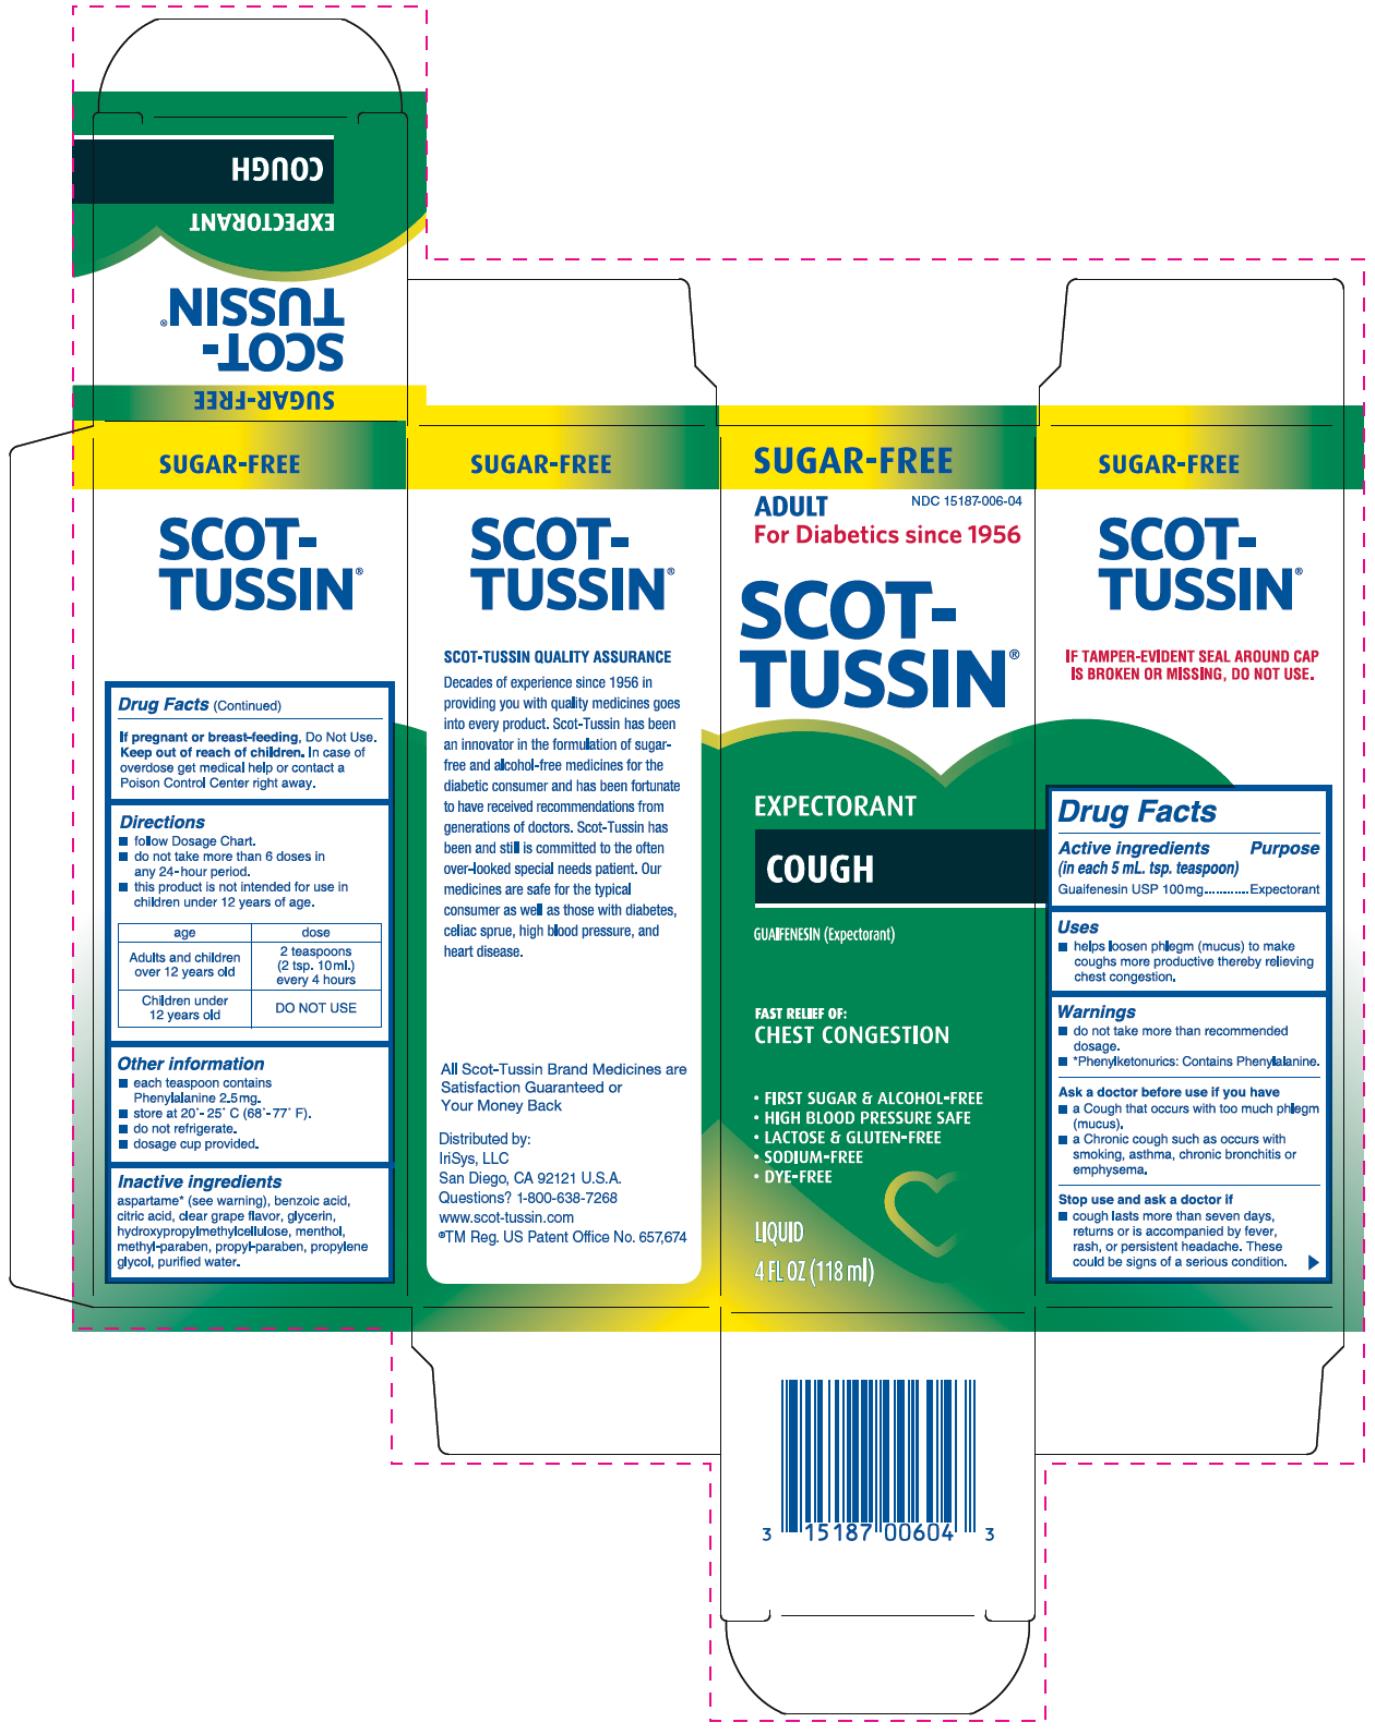 PRINCIPAL DISPLAY PANEL 
SUGAR-FREE
ADULT	NDC 15187-006-04
For Diabetics since 1956
SCOT-TUSSIN®
EXPECTORANT
COUGH
GUAIFENESIN (Expectorant)
FAST RELIEF OF:
CHEST CONGESTION
•	FIRST SUGAR & ALCOHOL